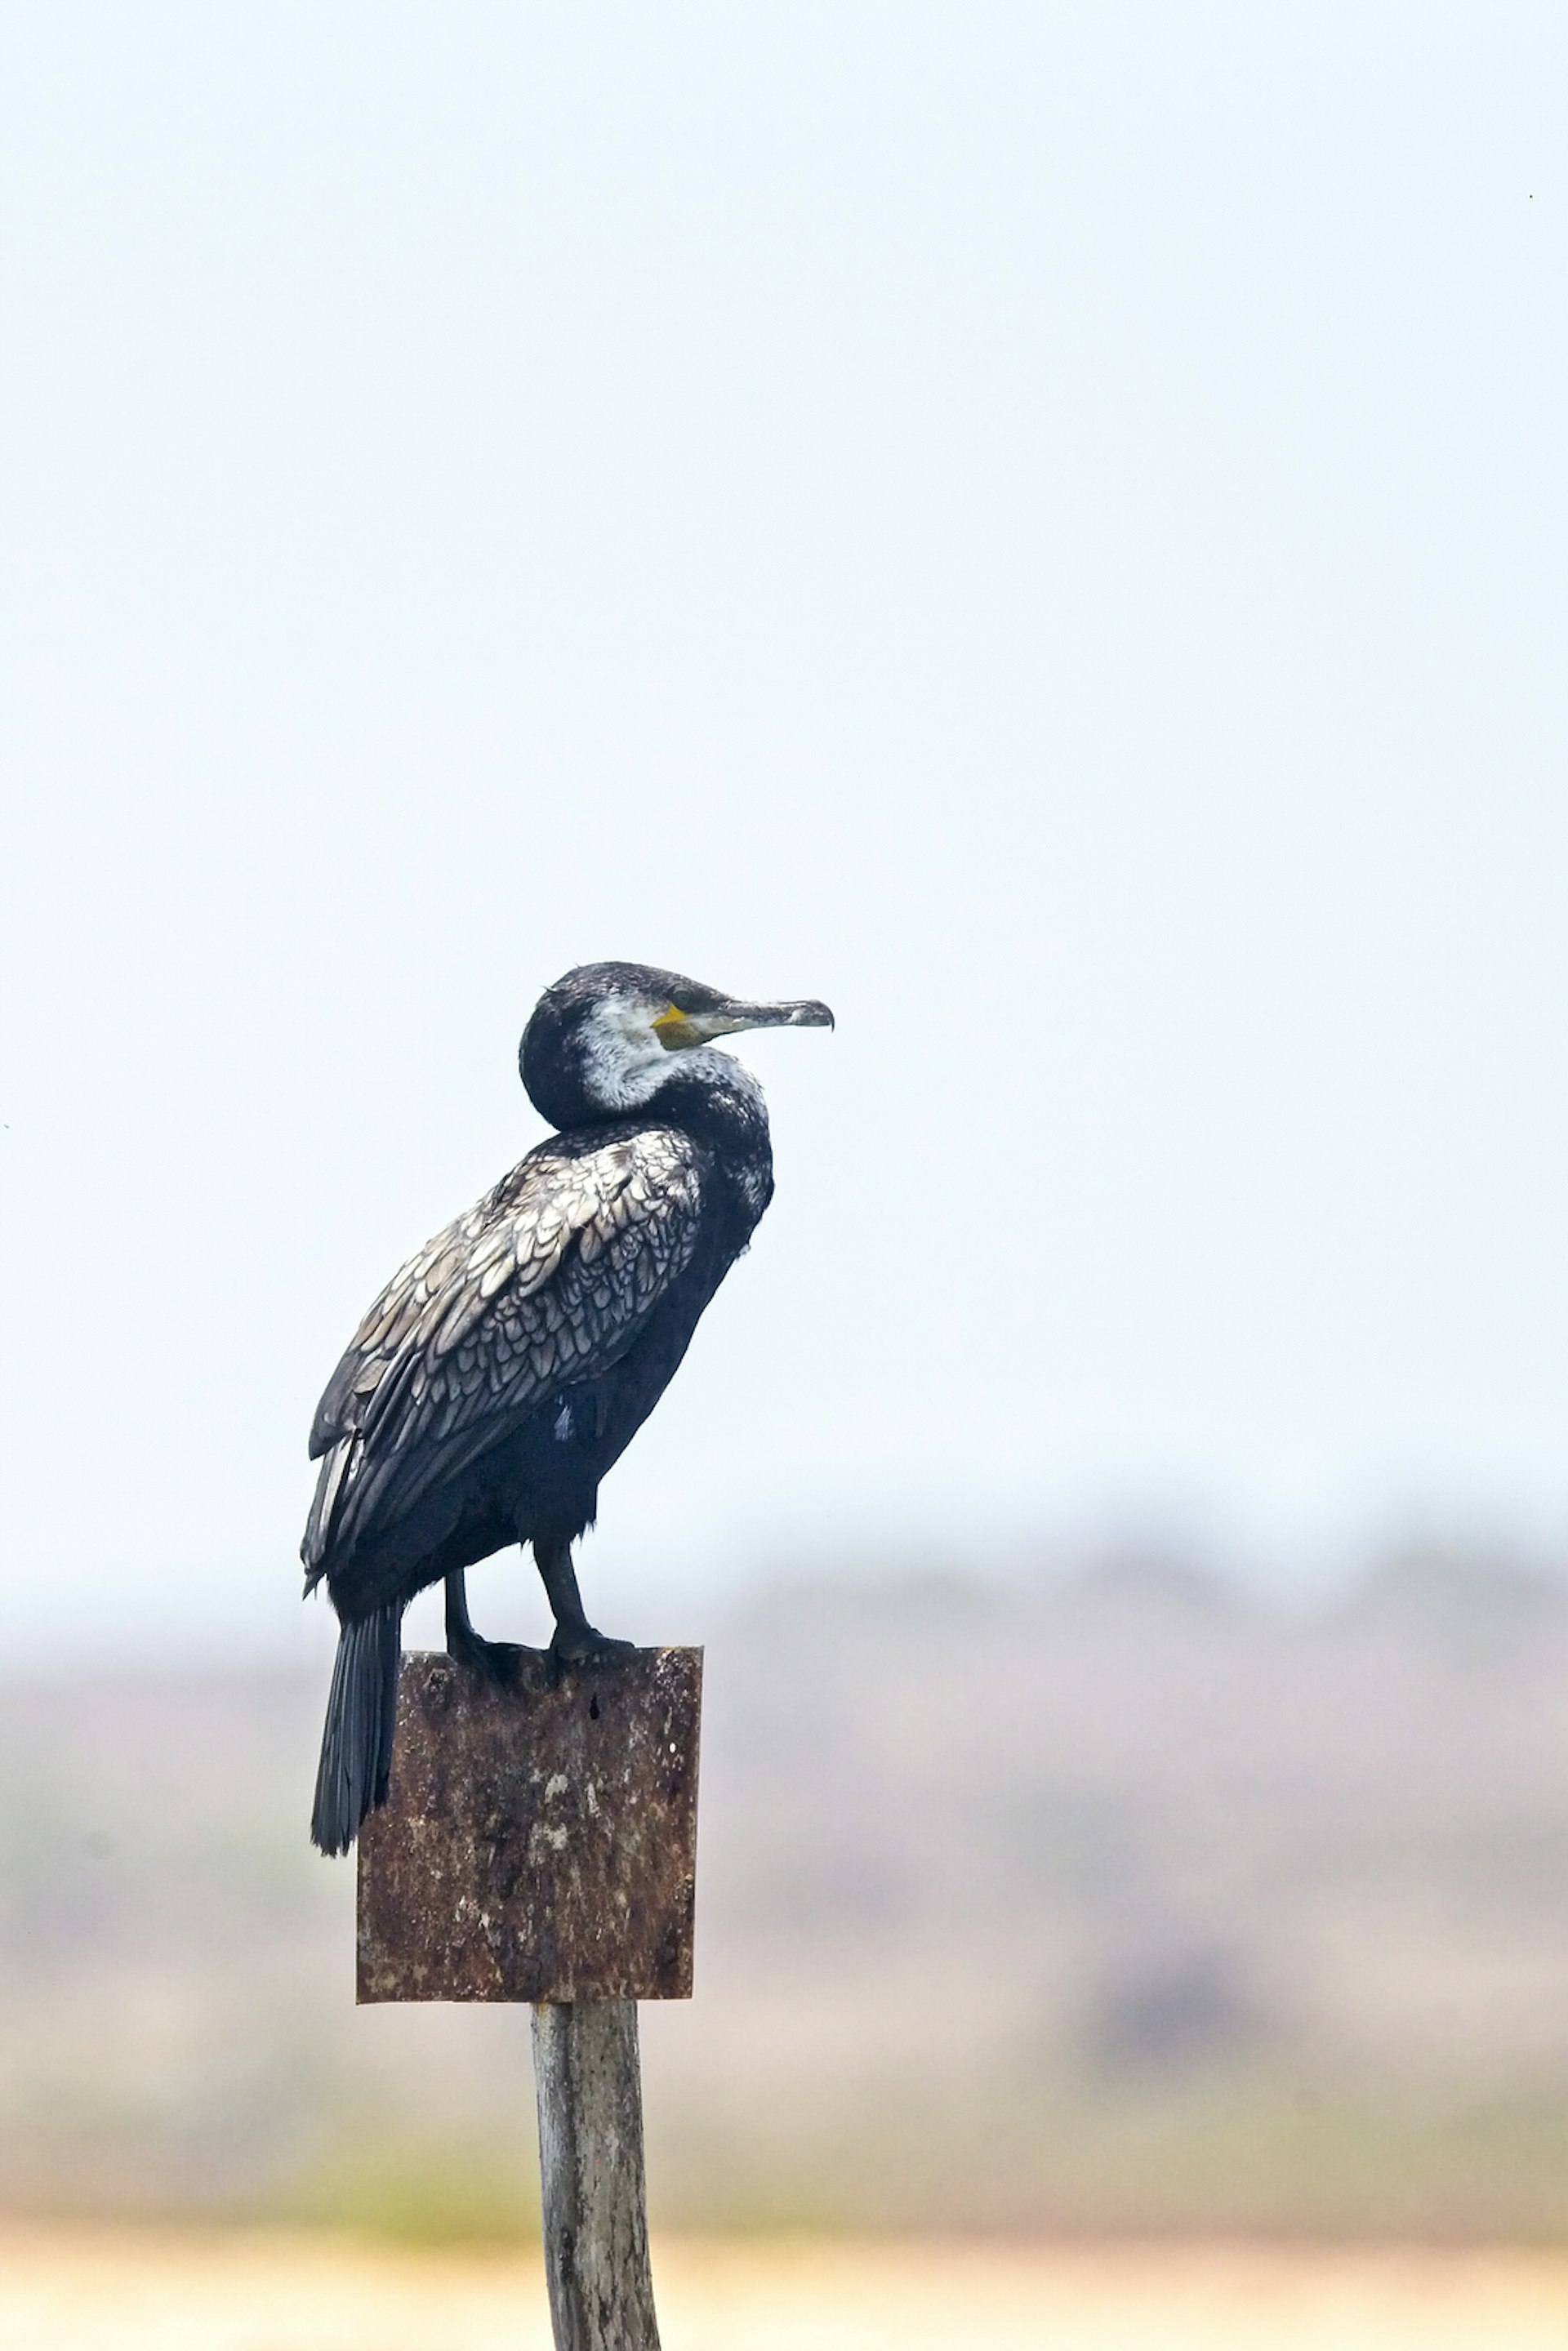 Great Cormorant (Phalacrocorax carbo maroccanus), perched on a post, the river estuary at Oualidia, Morocco. Tony Mills / Shutterstock